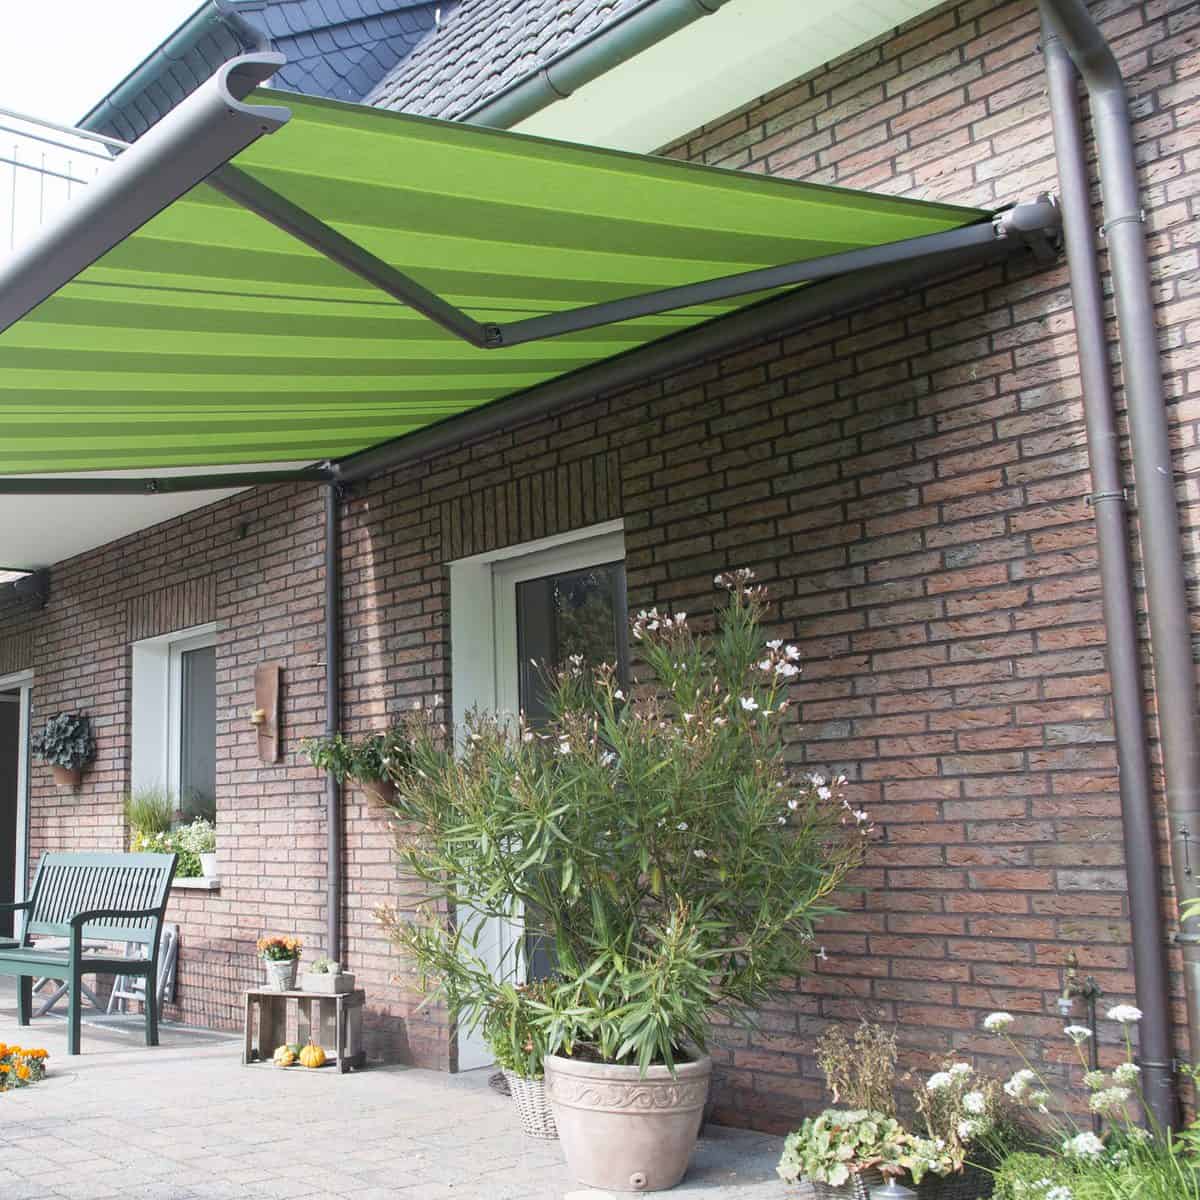 markilux 990 awning in green stripes, attached to a wall on a house